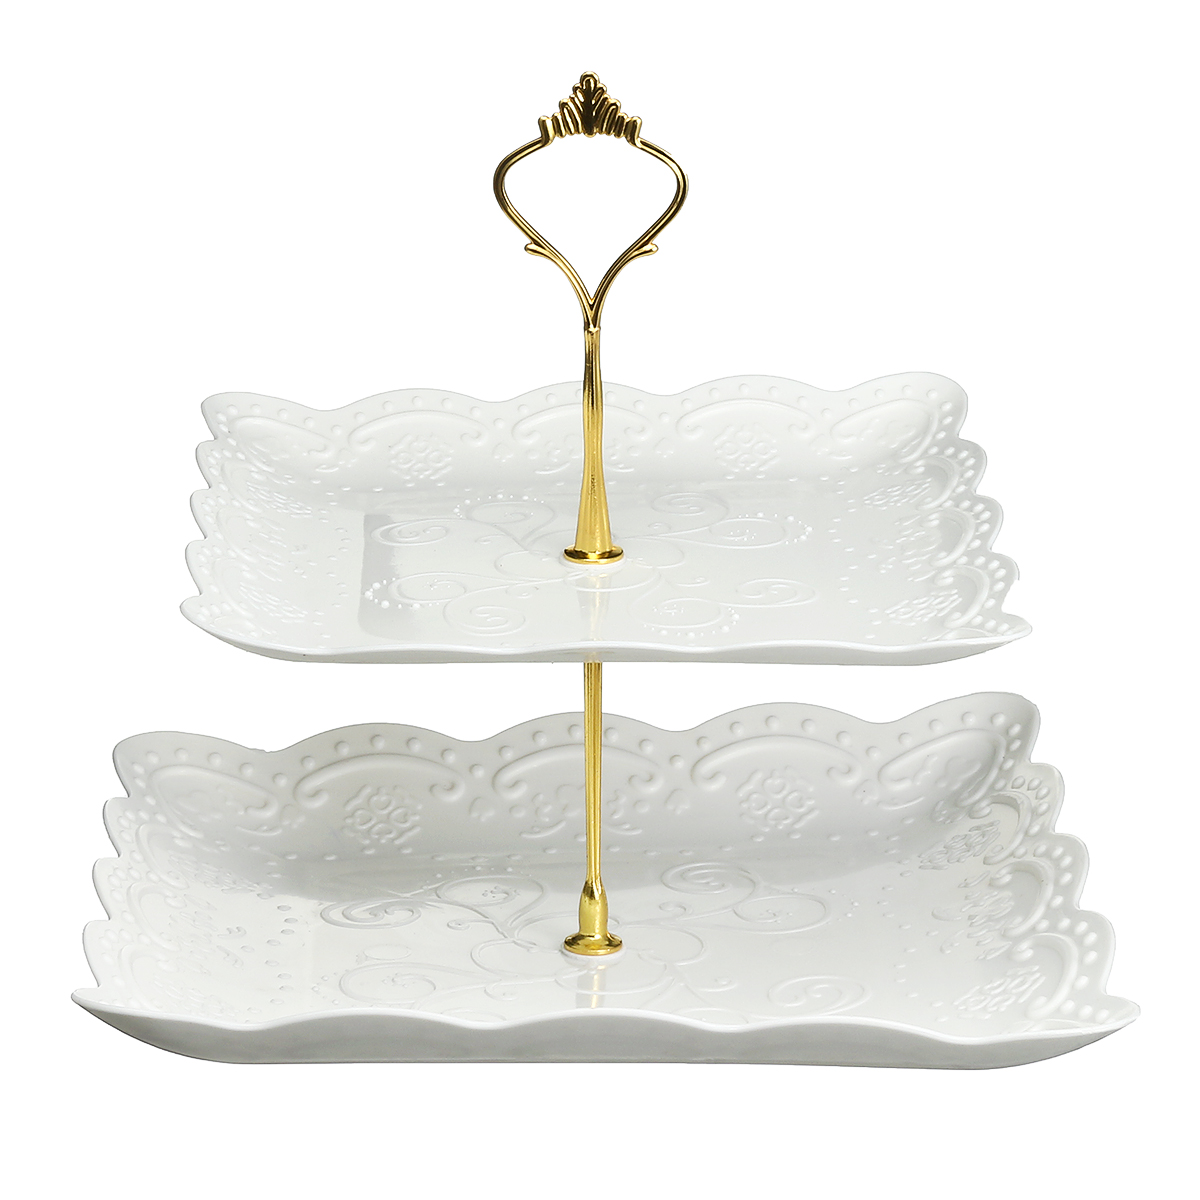 European-style-23-Tier-Fruit-Plate-Dessert-Tray-Cake-Table-Multi-layer-Cake-Stand-Cake-Setting-Table-1926348-17